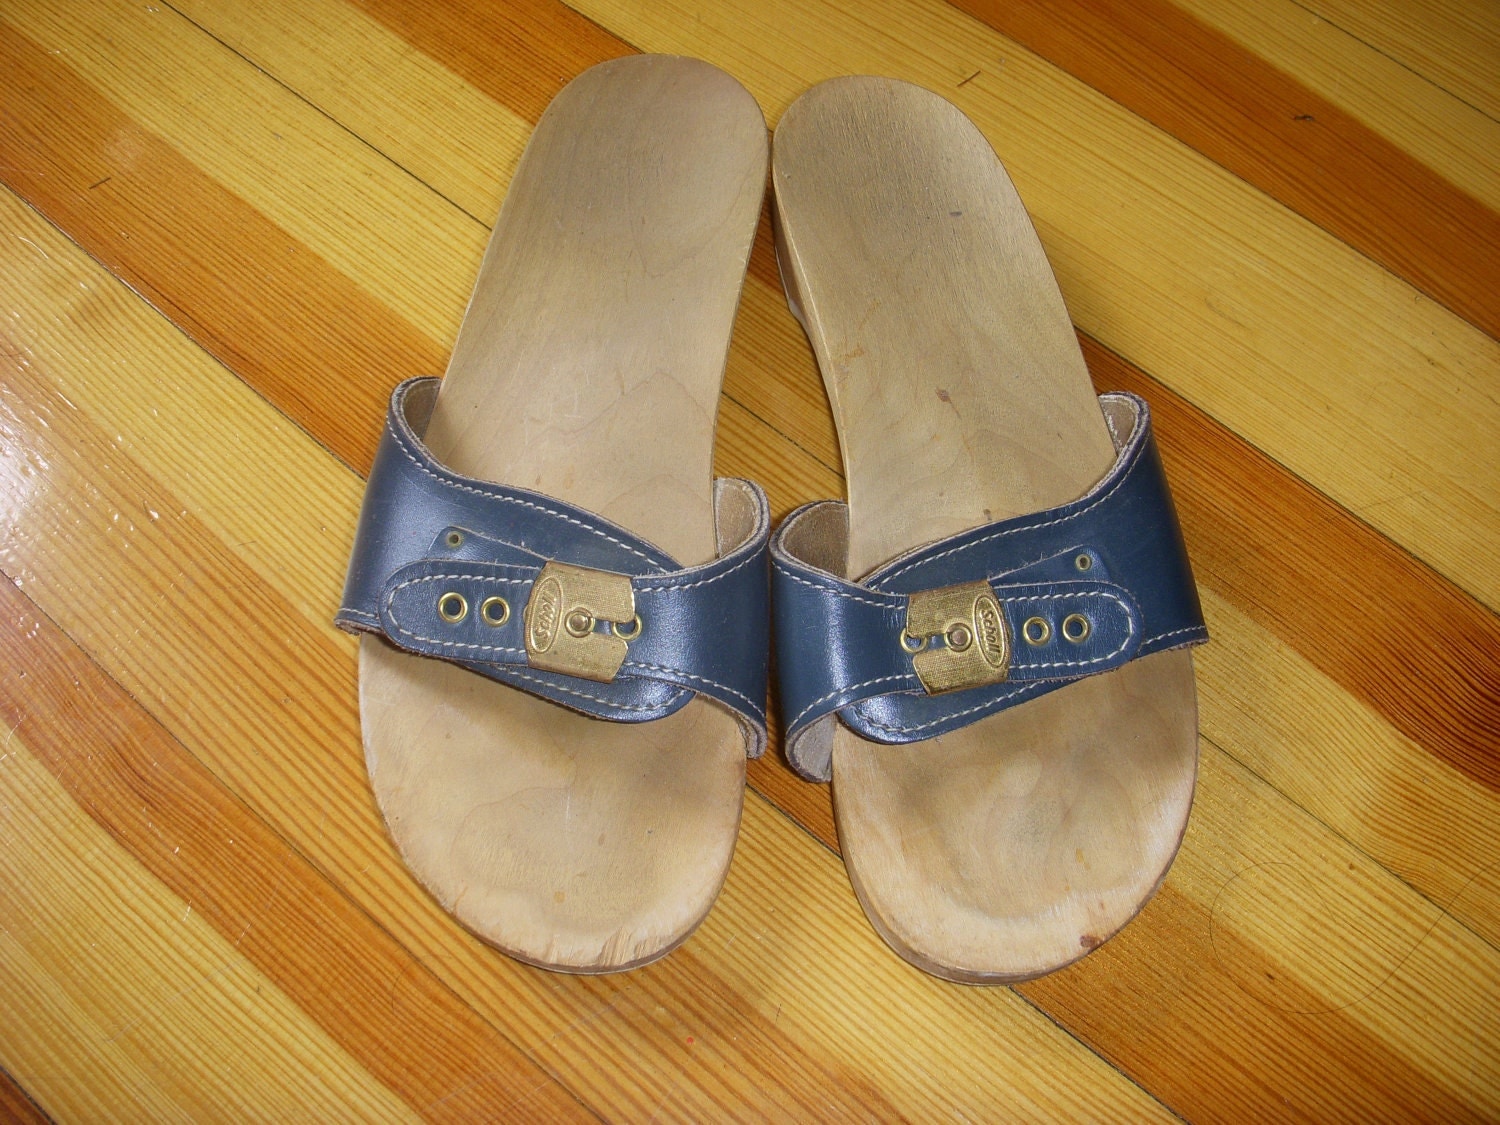 Vintage Dr Scholl S Sandals Slides Wooden By Myyiayiahadthat